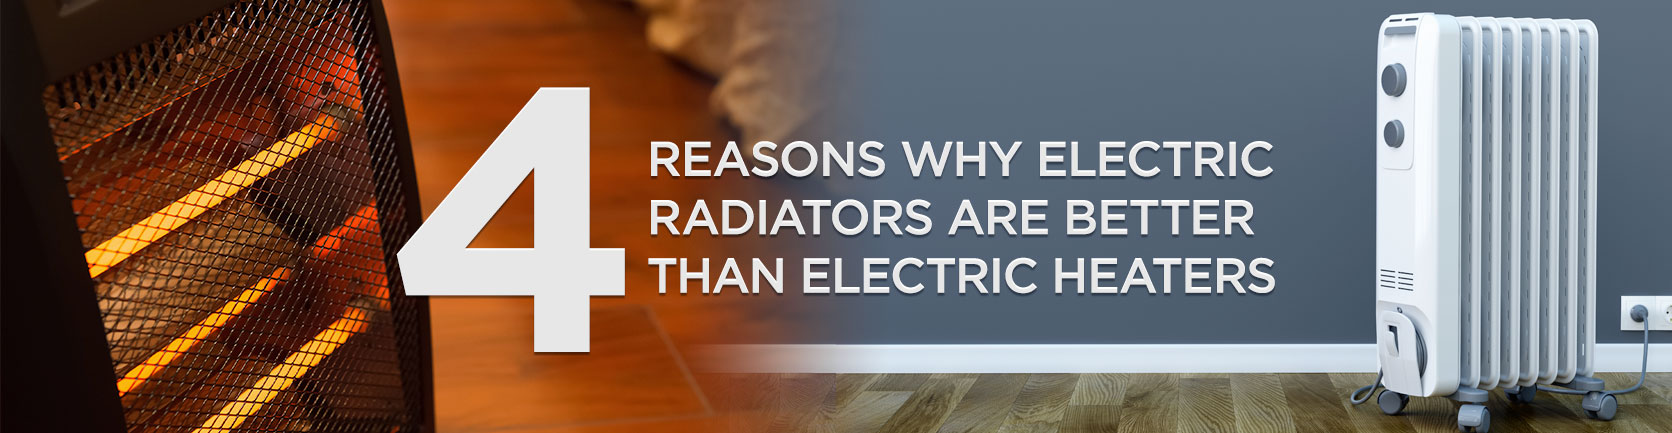 4 reasons why electric radiators are better than electric heaters